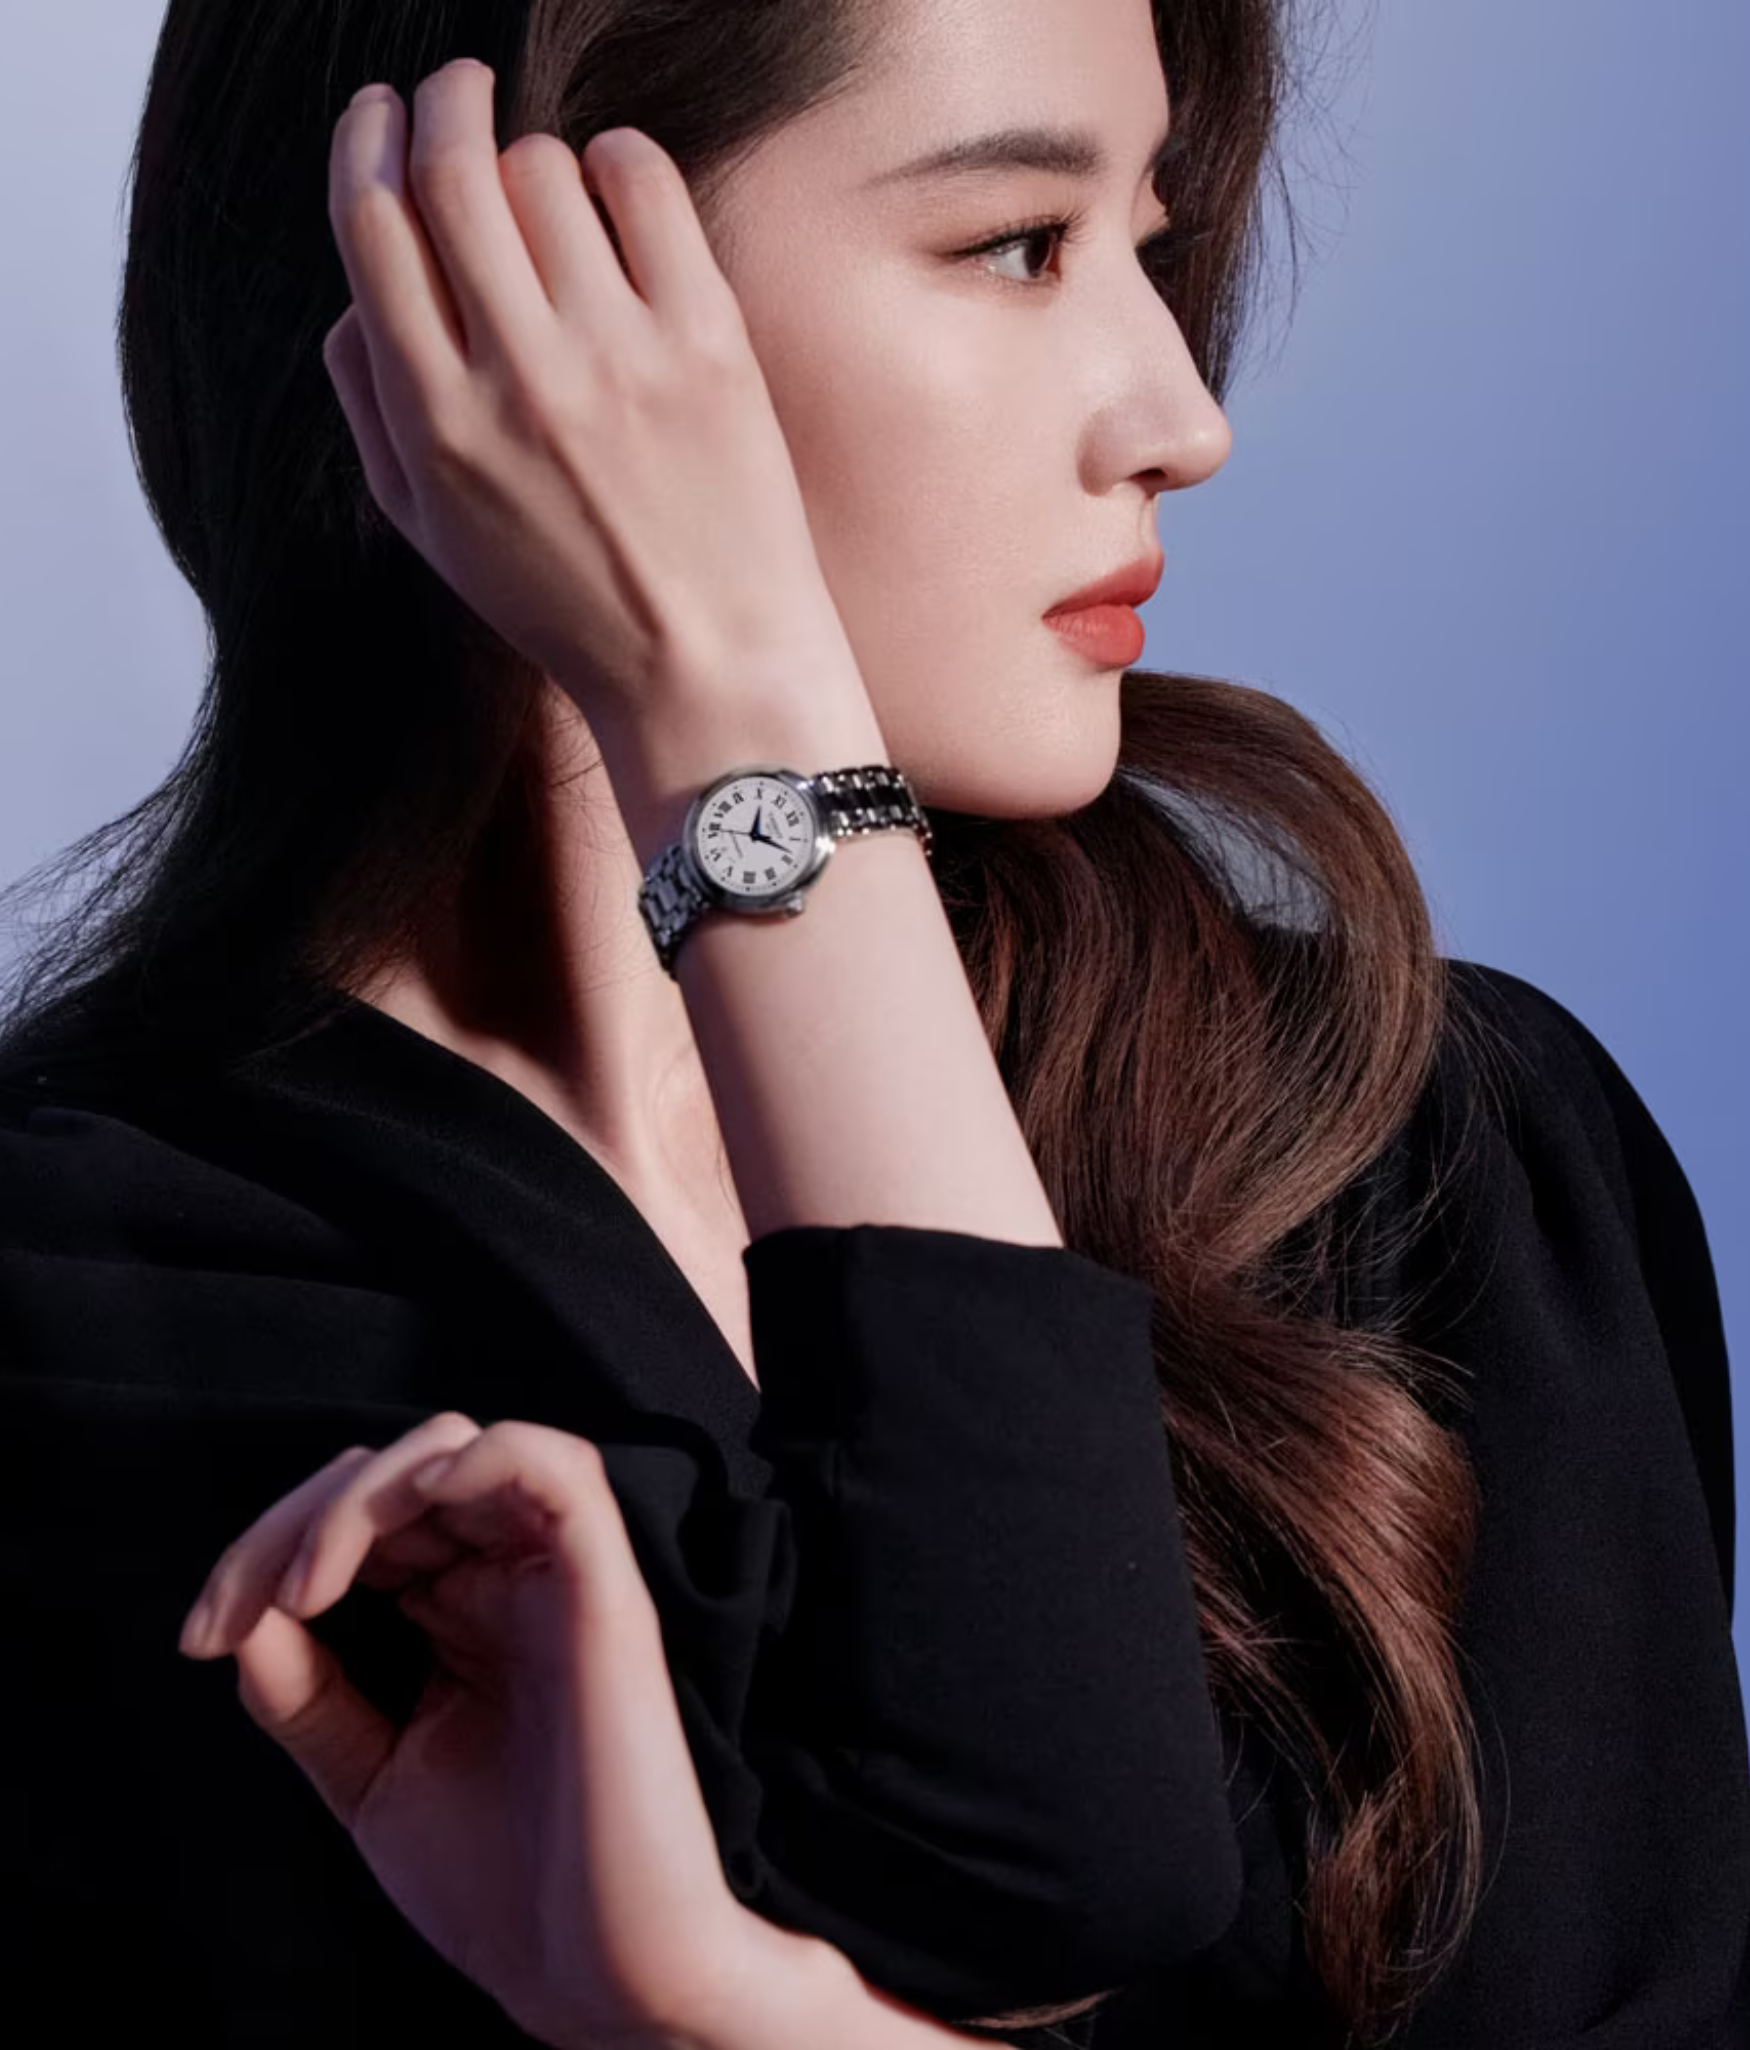 Discover elegance as Liu Yifei adorns the Tissot Classic Dream Lady White. Explore timeless beauty and precision with Tissot watches, as showcased by the talented actress.